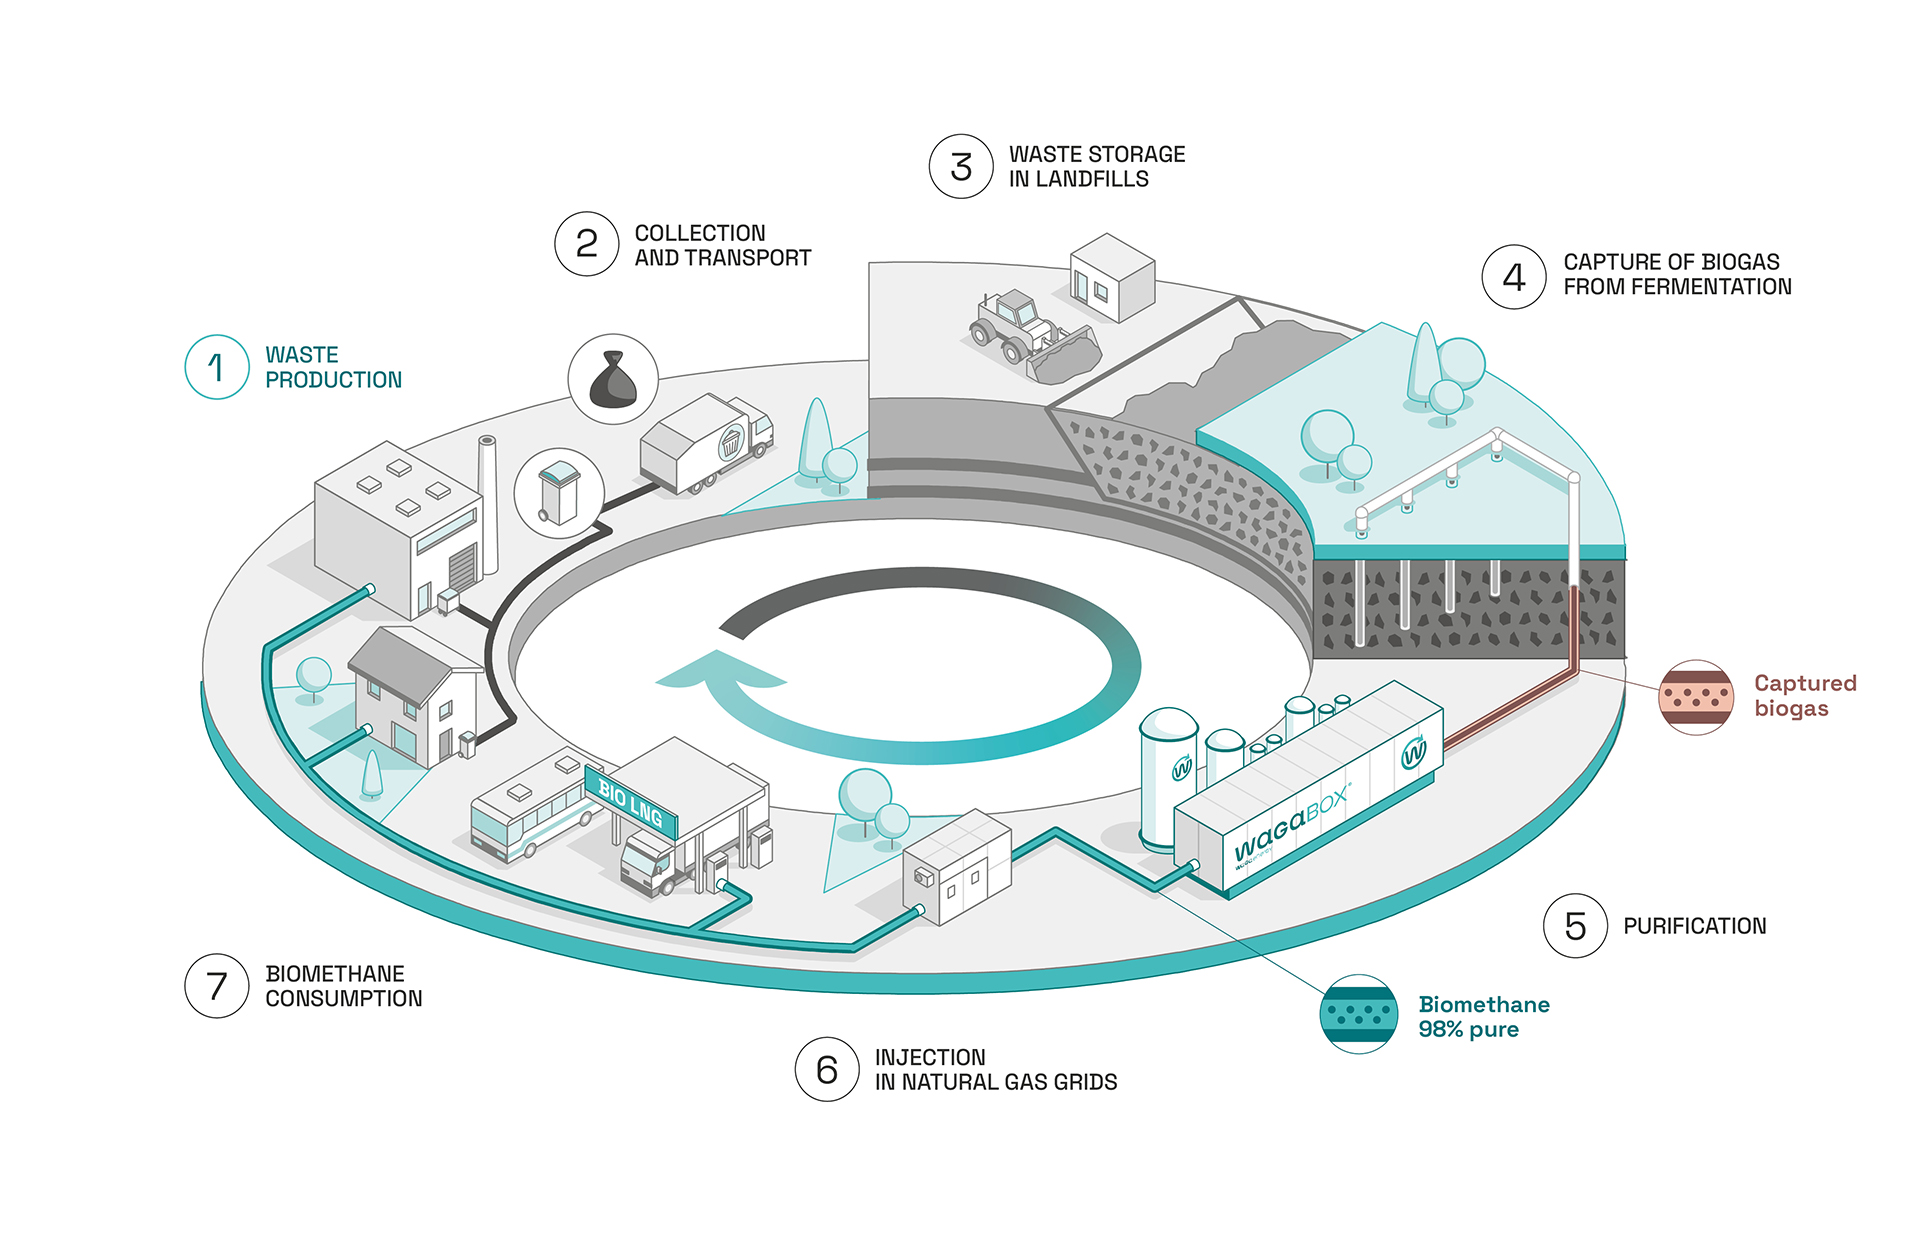 Illustration showing the place of Waga Energy and the WAGABOX in the circular economy. Step 1: Production of waste by individuals and industry. Step 2: Collection and transportation of this waste. Step 3: Burial of waste in a non-hazardous waste storage facility (ISDND). Step 4: Capture of the biogas produced by fermentation of the landfilled waste. Step 5: Biogas purification. Step 6: Injection of 98%-pure biomethane into the natural gas network. Step 7: Consumption of biomethane by residential and industrial customers.